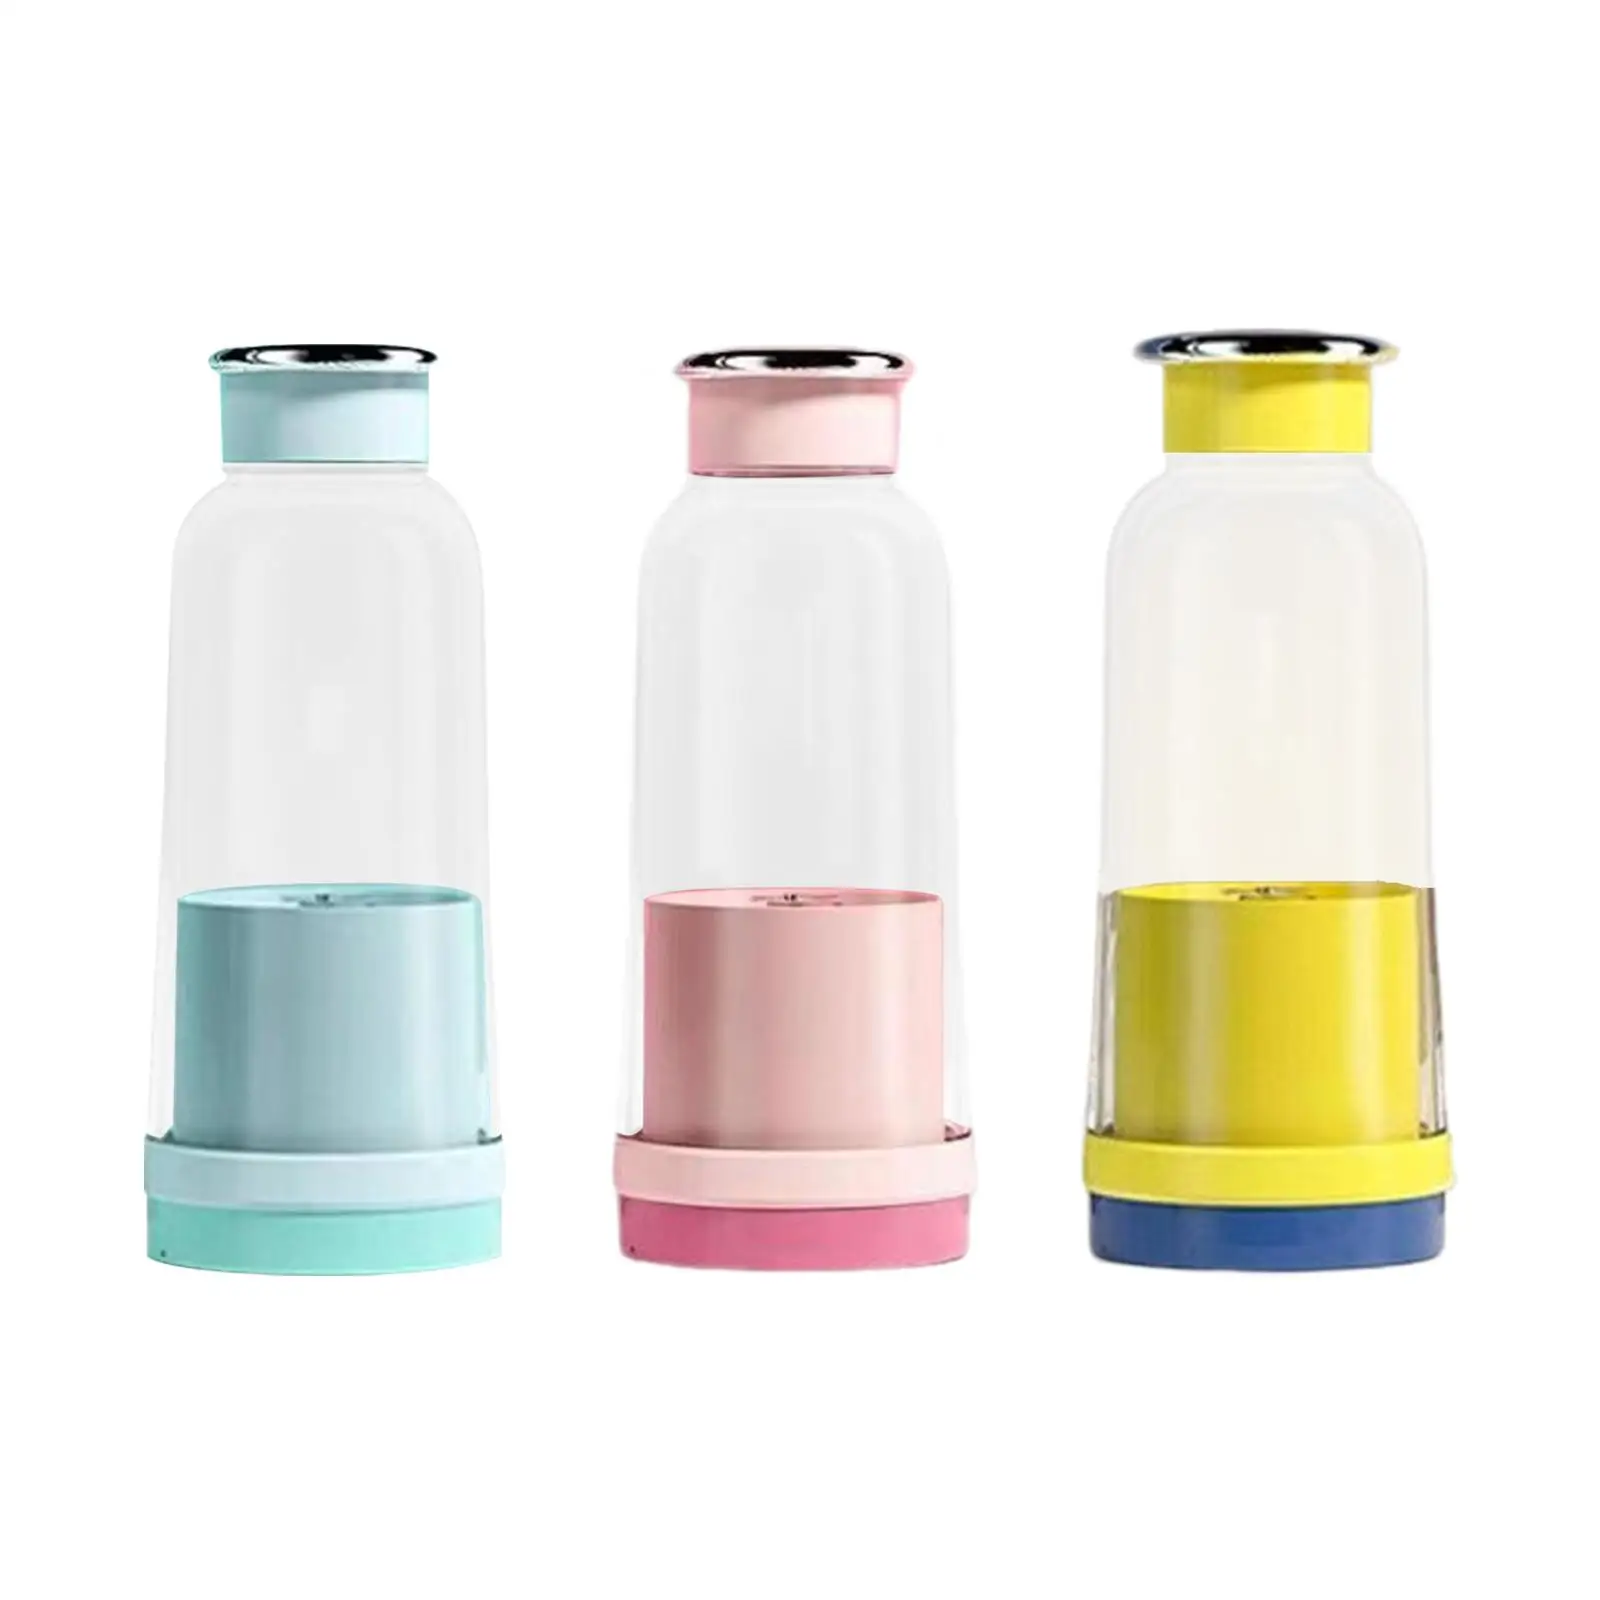 Portable Juice Cup USB Multifunctional Smoothies Small Kitchen Appliances Food Shaker Smoothie for Outdoor Kitchen Home Camping